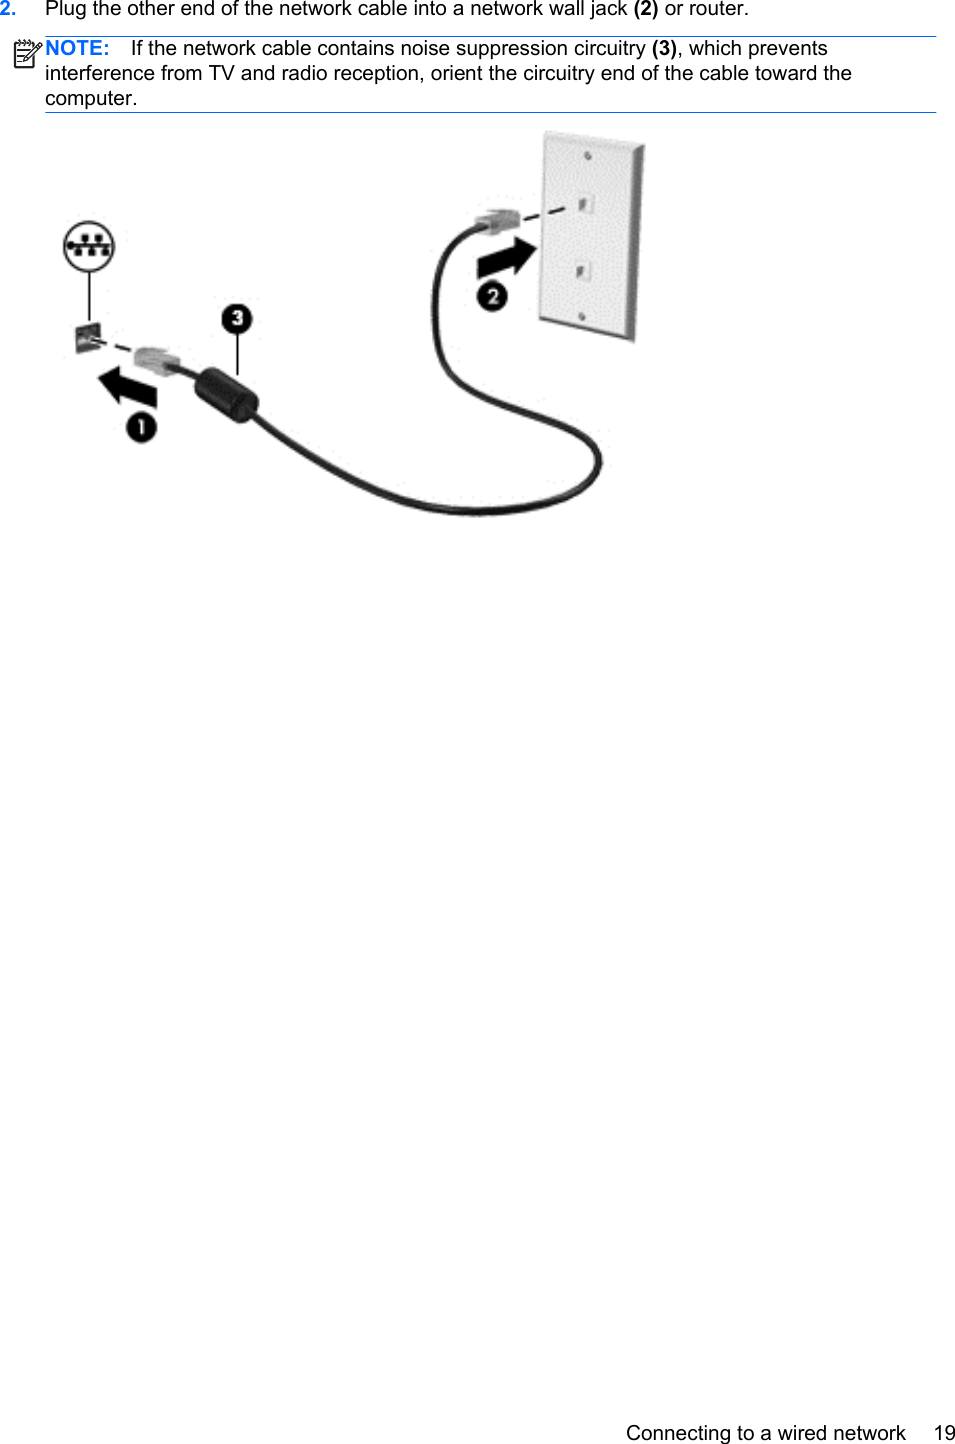 2. Plug the other end of the network cable into a network wall jack (2) or router.NOTE: If the network cable contains noise suppression circuitry (3), which preventsinterference from TV and radio reception, orient the circuitry end of the cable toward thecomputer.Connecting to a wired network 19